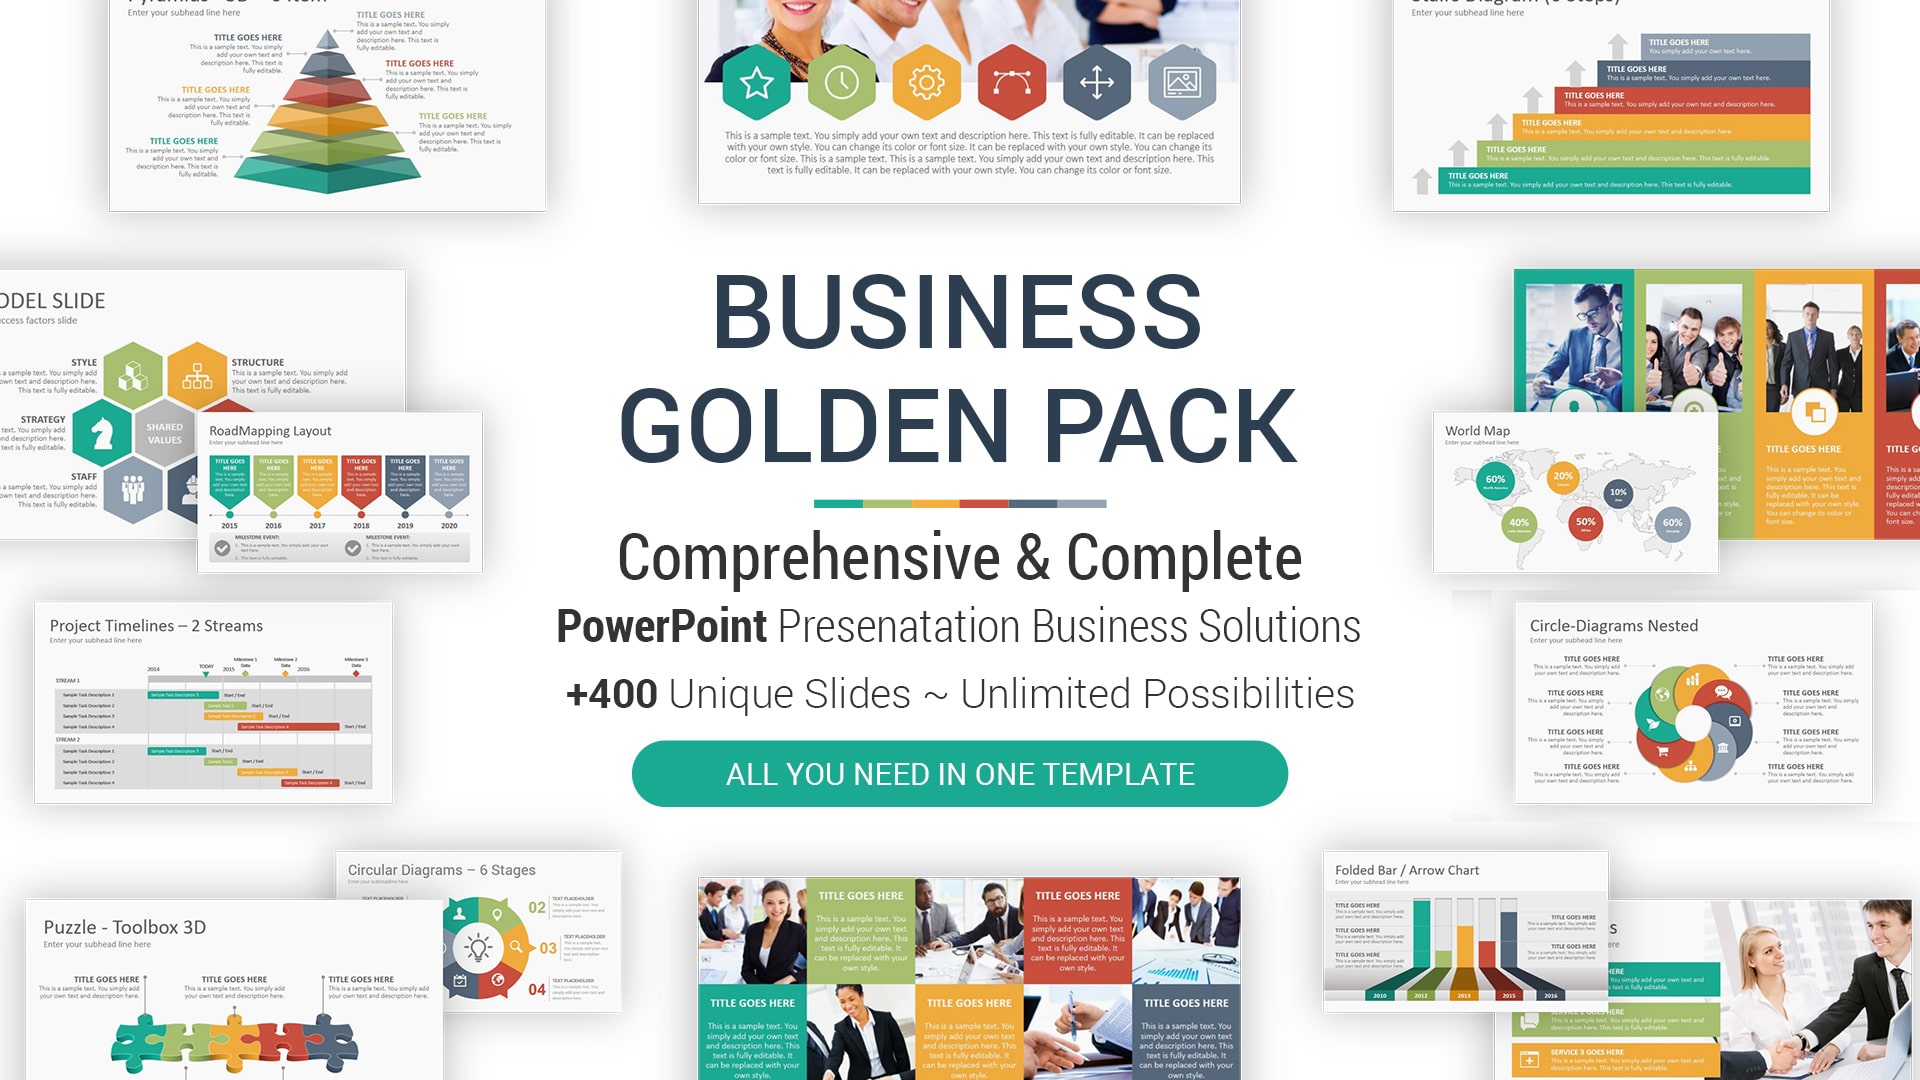 Business Golden Pack Multipurpose PowerPoint Presentation Template – Clean PowerPoint Template for Business Presentations